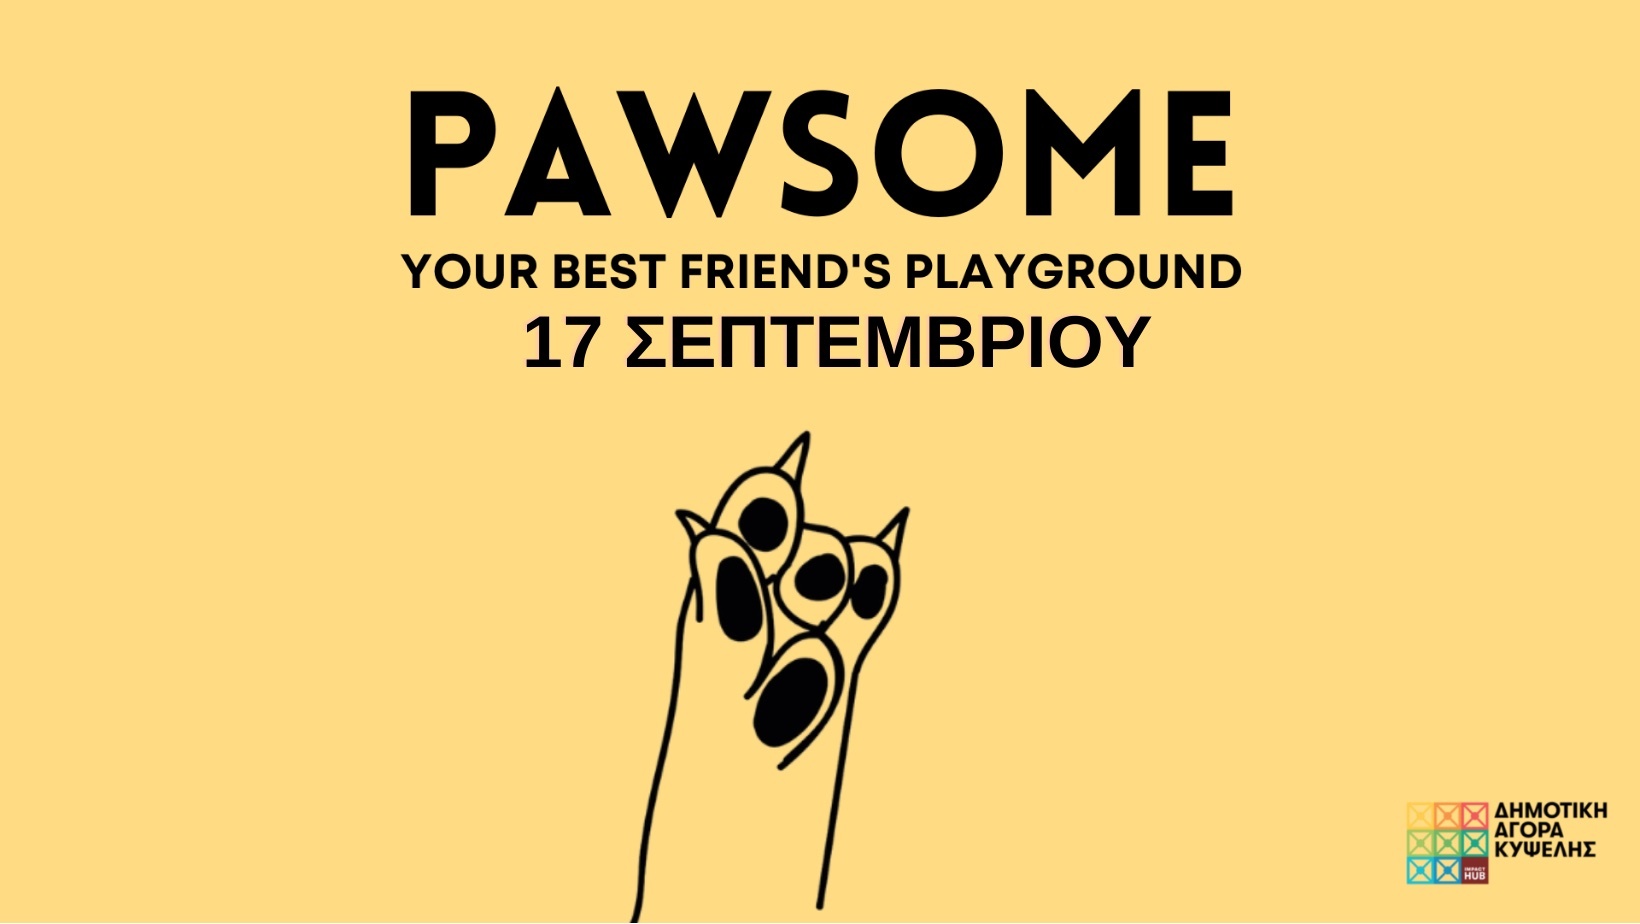 Pawsome_Cover_New.jpg?mtime=20220912222026#asset:371074